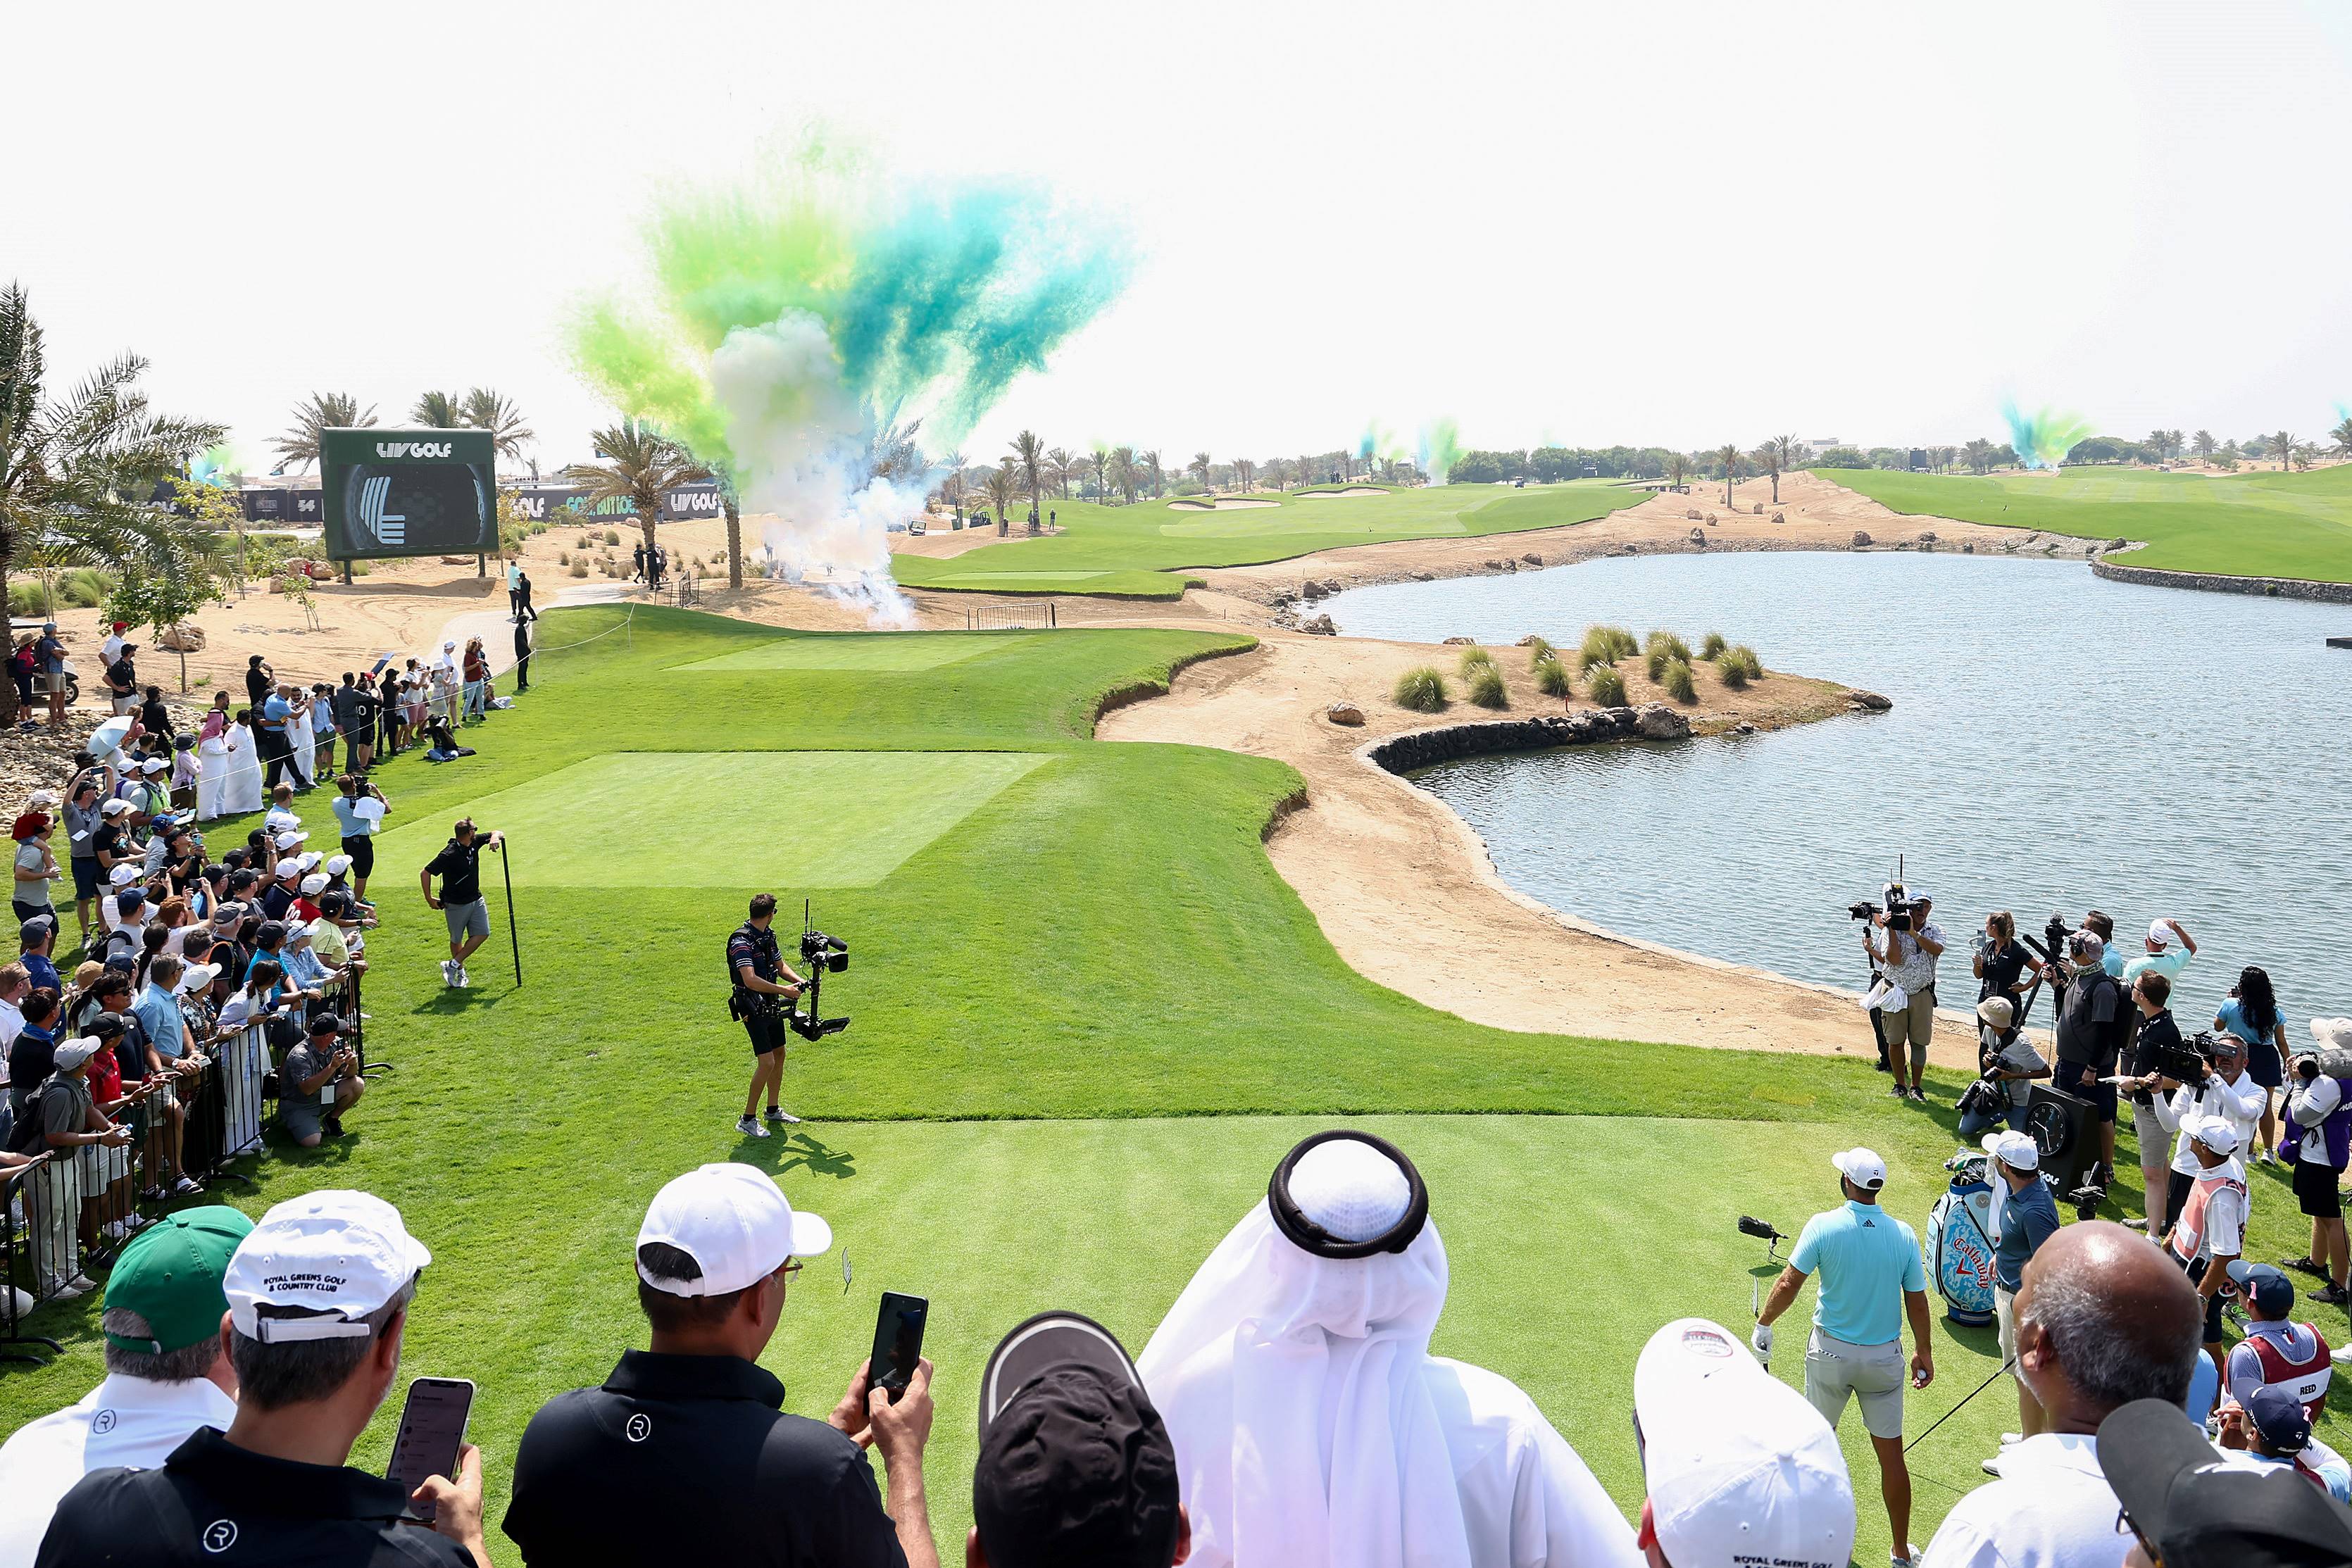 Fans watch from the first tee during day one of the LIV Golf Invitational - Jeddah at Royal Greens Golf & Country Club on October 14, 2022, in King Abdullah Economic City, Saudi Arabia. 